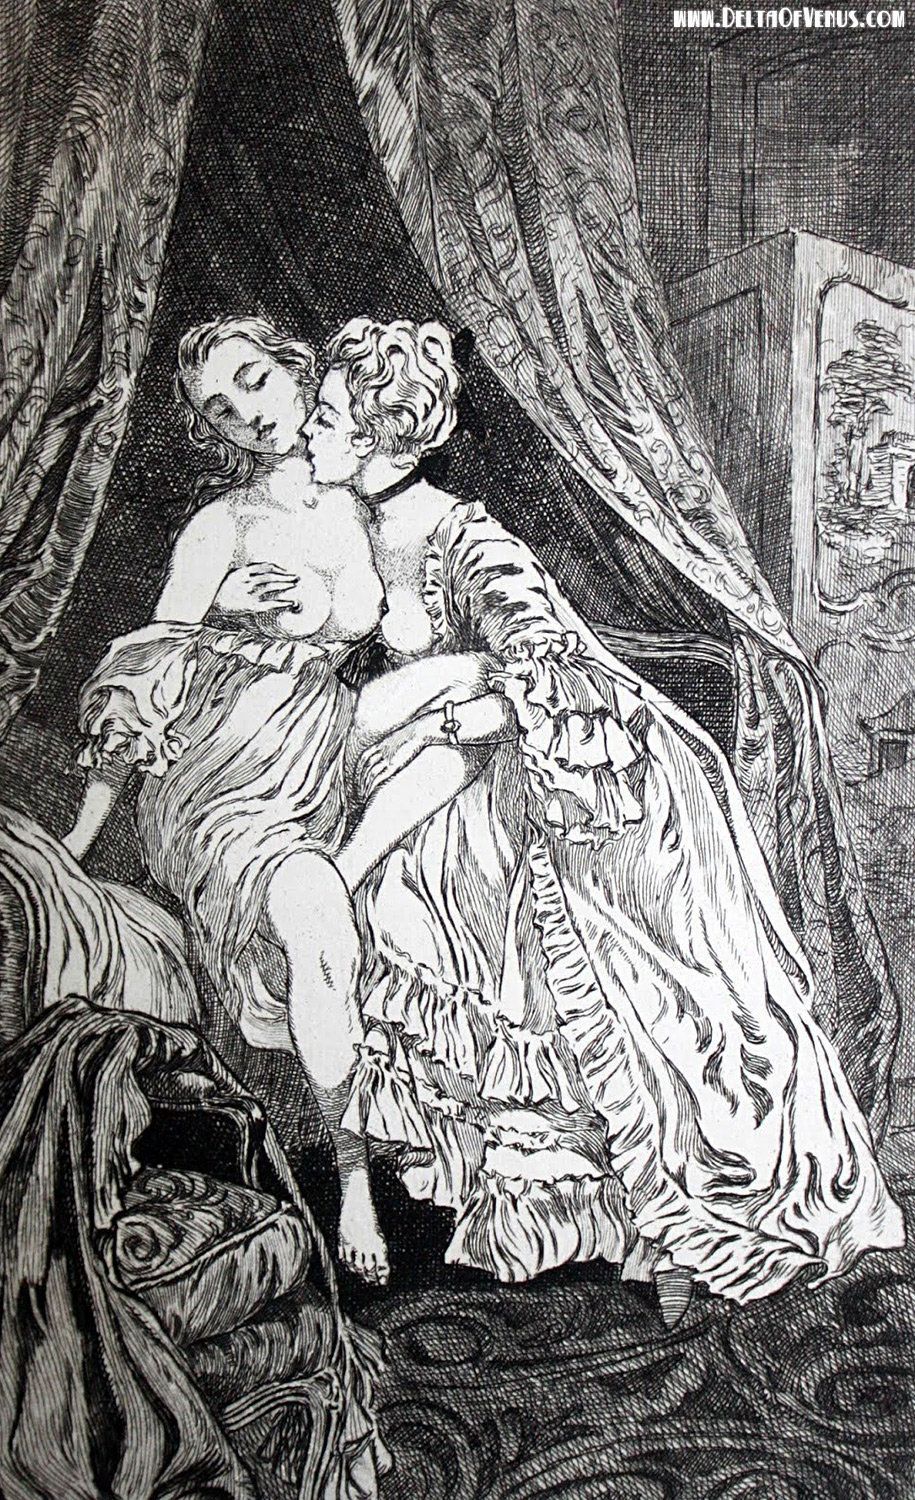 19th Century Vintage Black Porn - Dive Into The Fantasies Of An Obscure 19th Century Erotic Illustrator  (NSFW) | HuffPost Entertainment